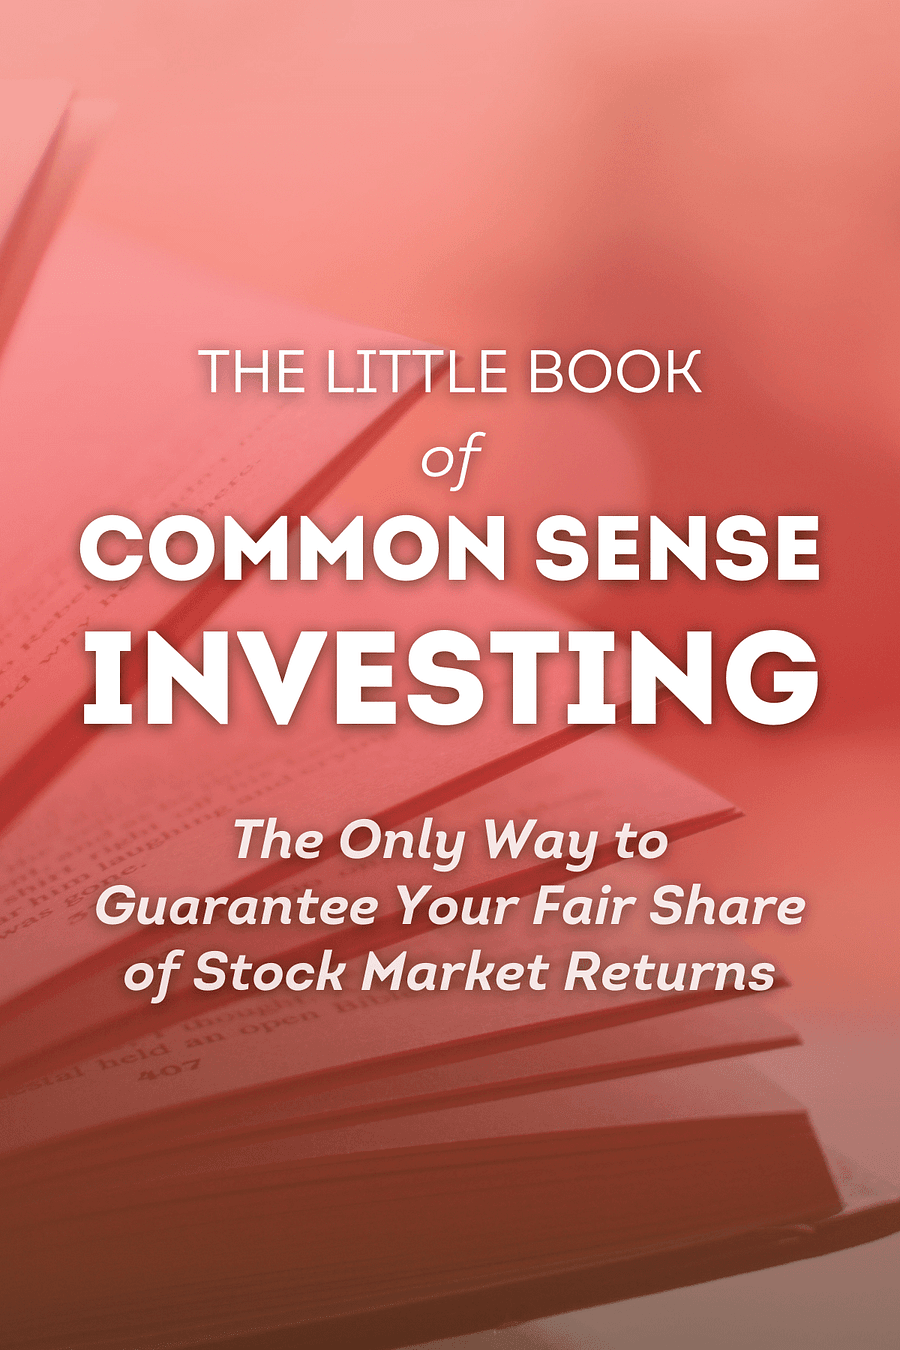 The Little Book of Common Sense Investing by John C. Bogle - Book Summary